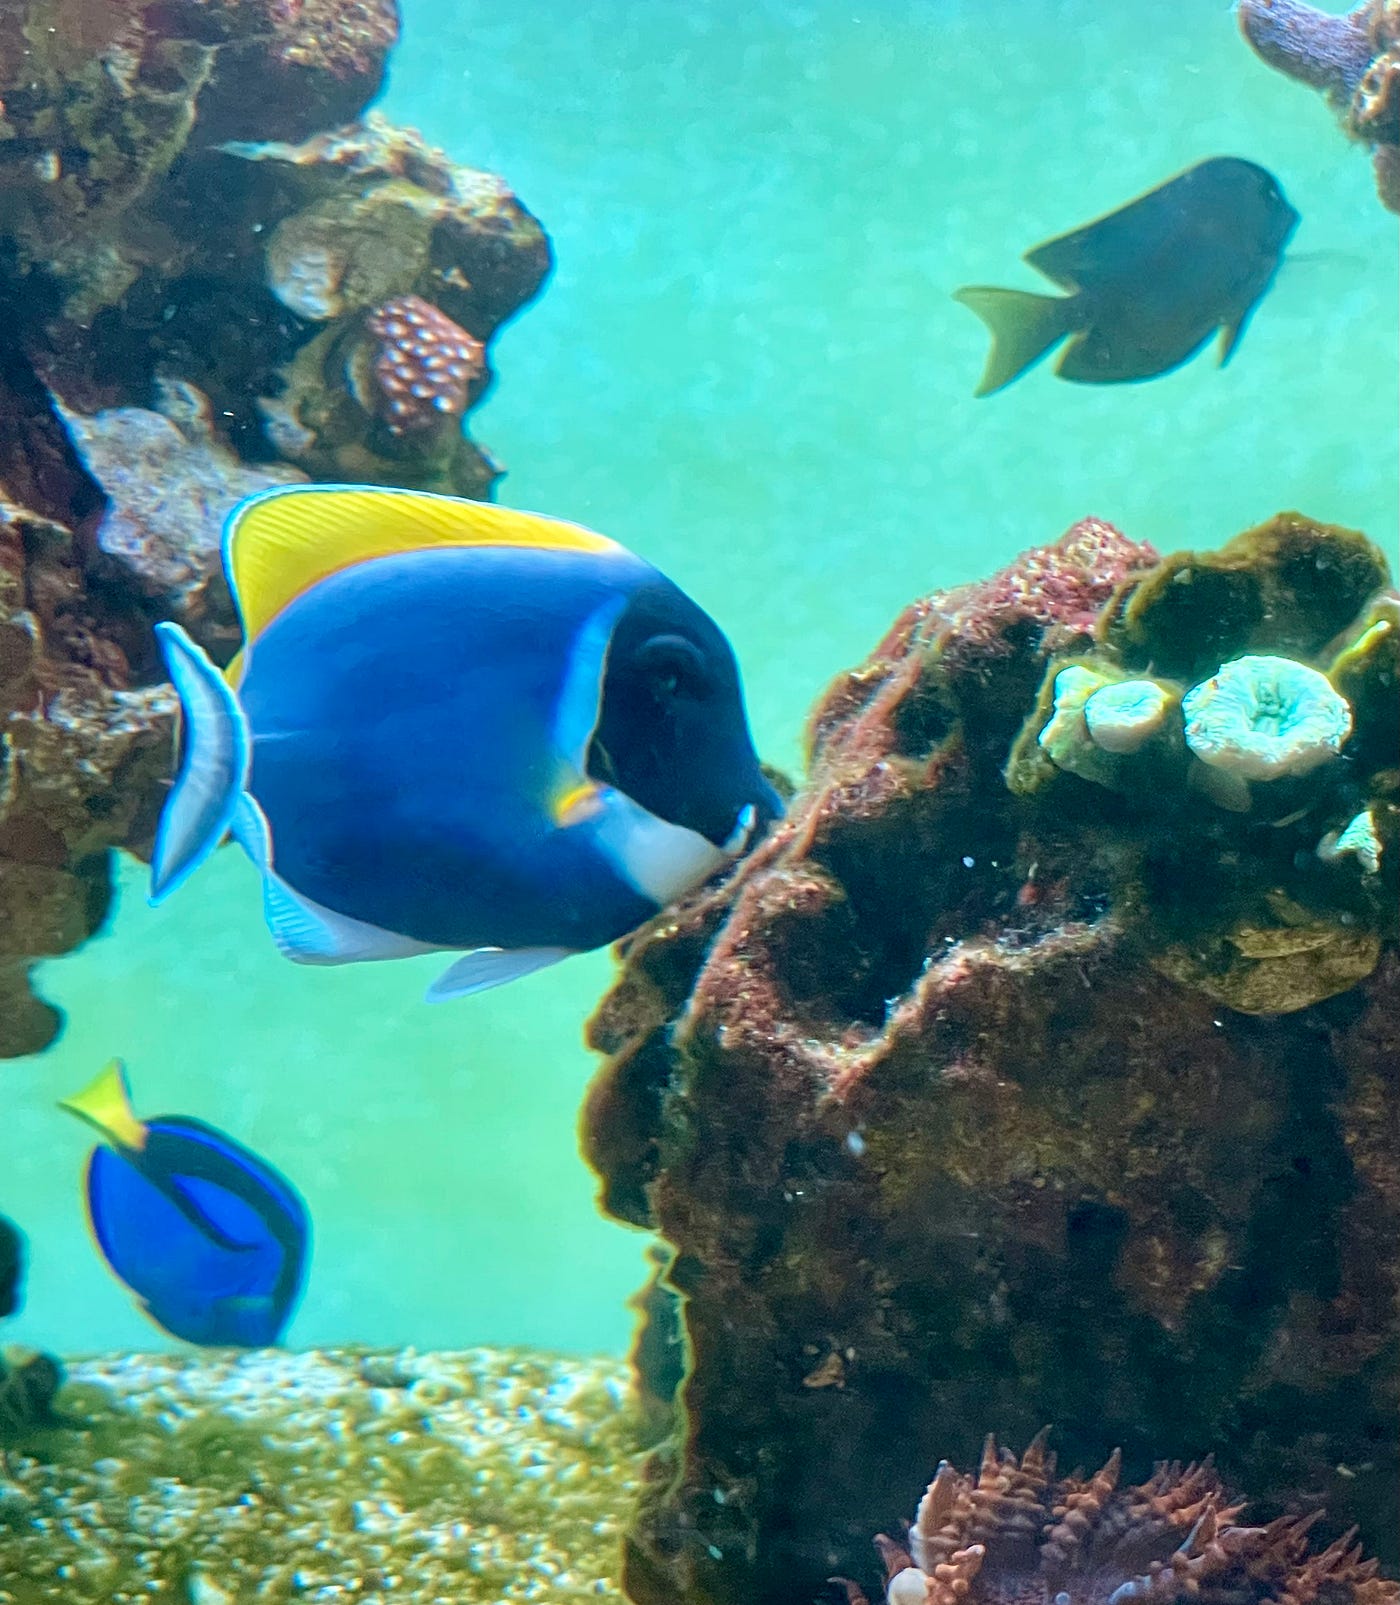 powder blue tang for sale  captive bred powder blue tangs for sale online